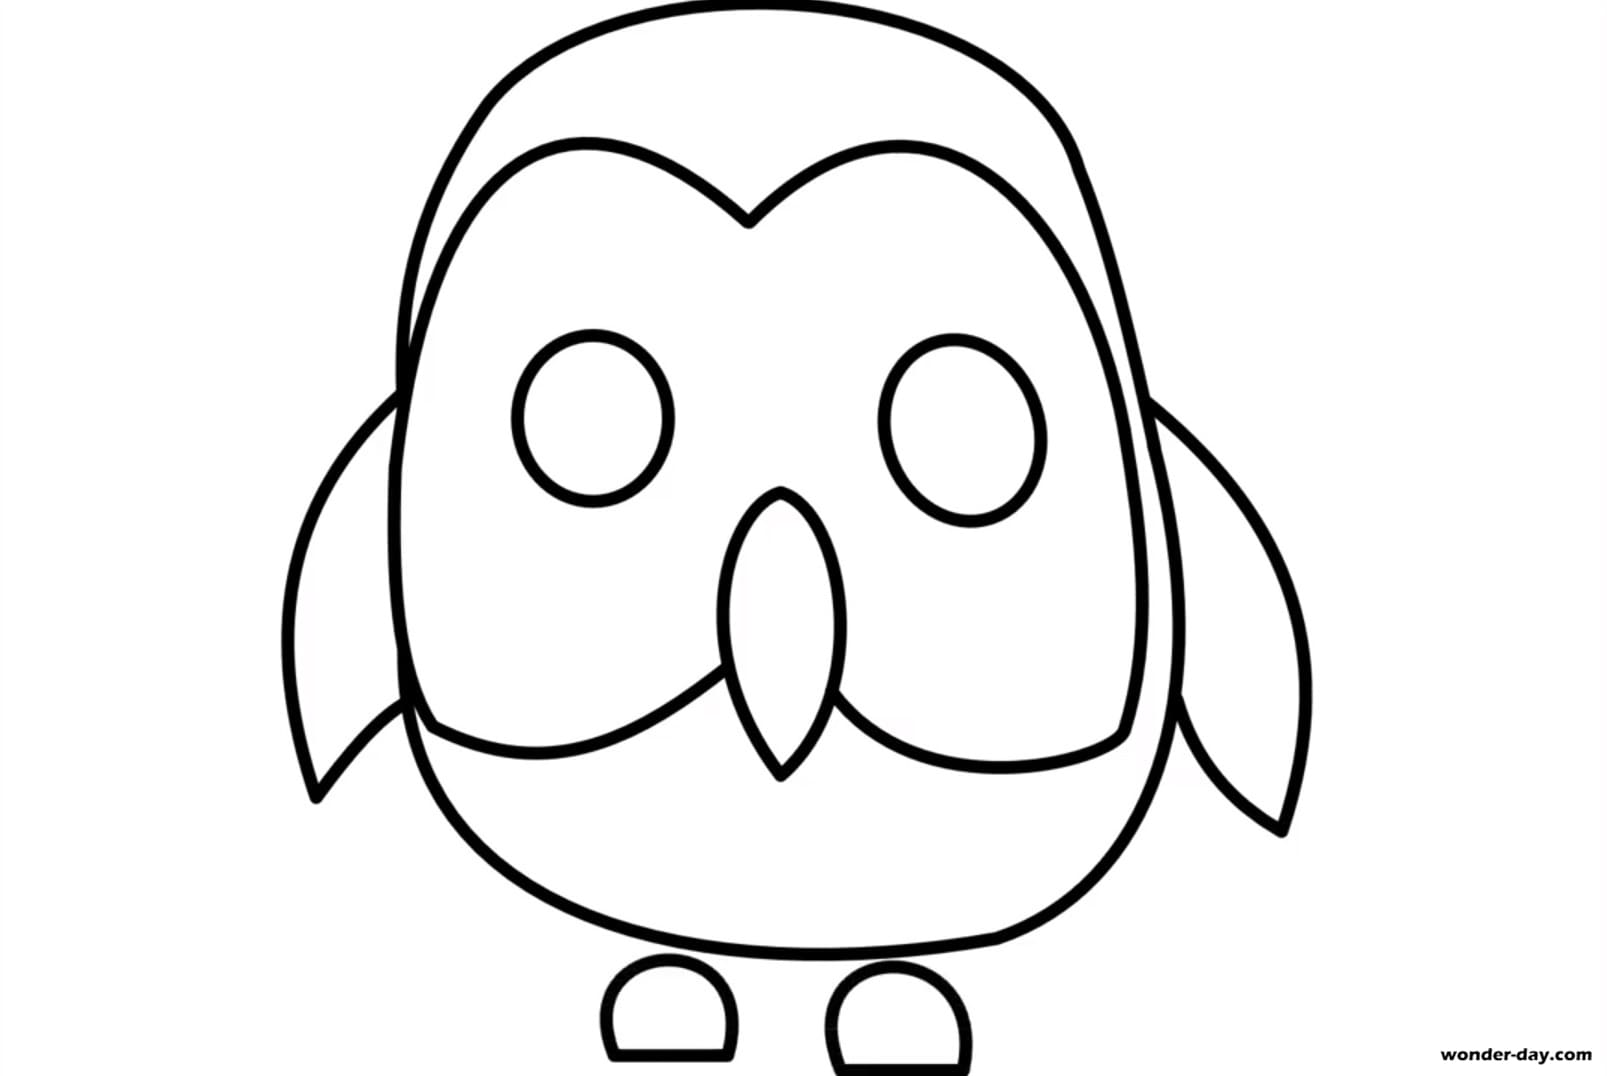 Coloring Pages Adopt Me. Print For Free | Wonder-day.com - Coloring Home